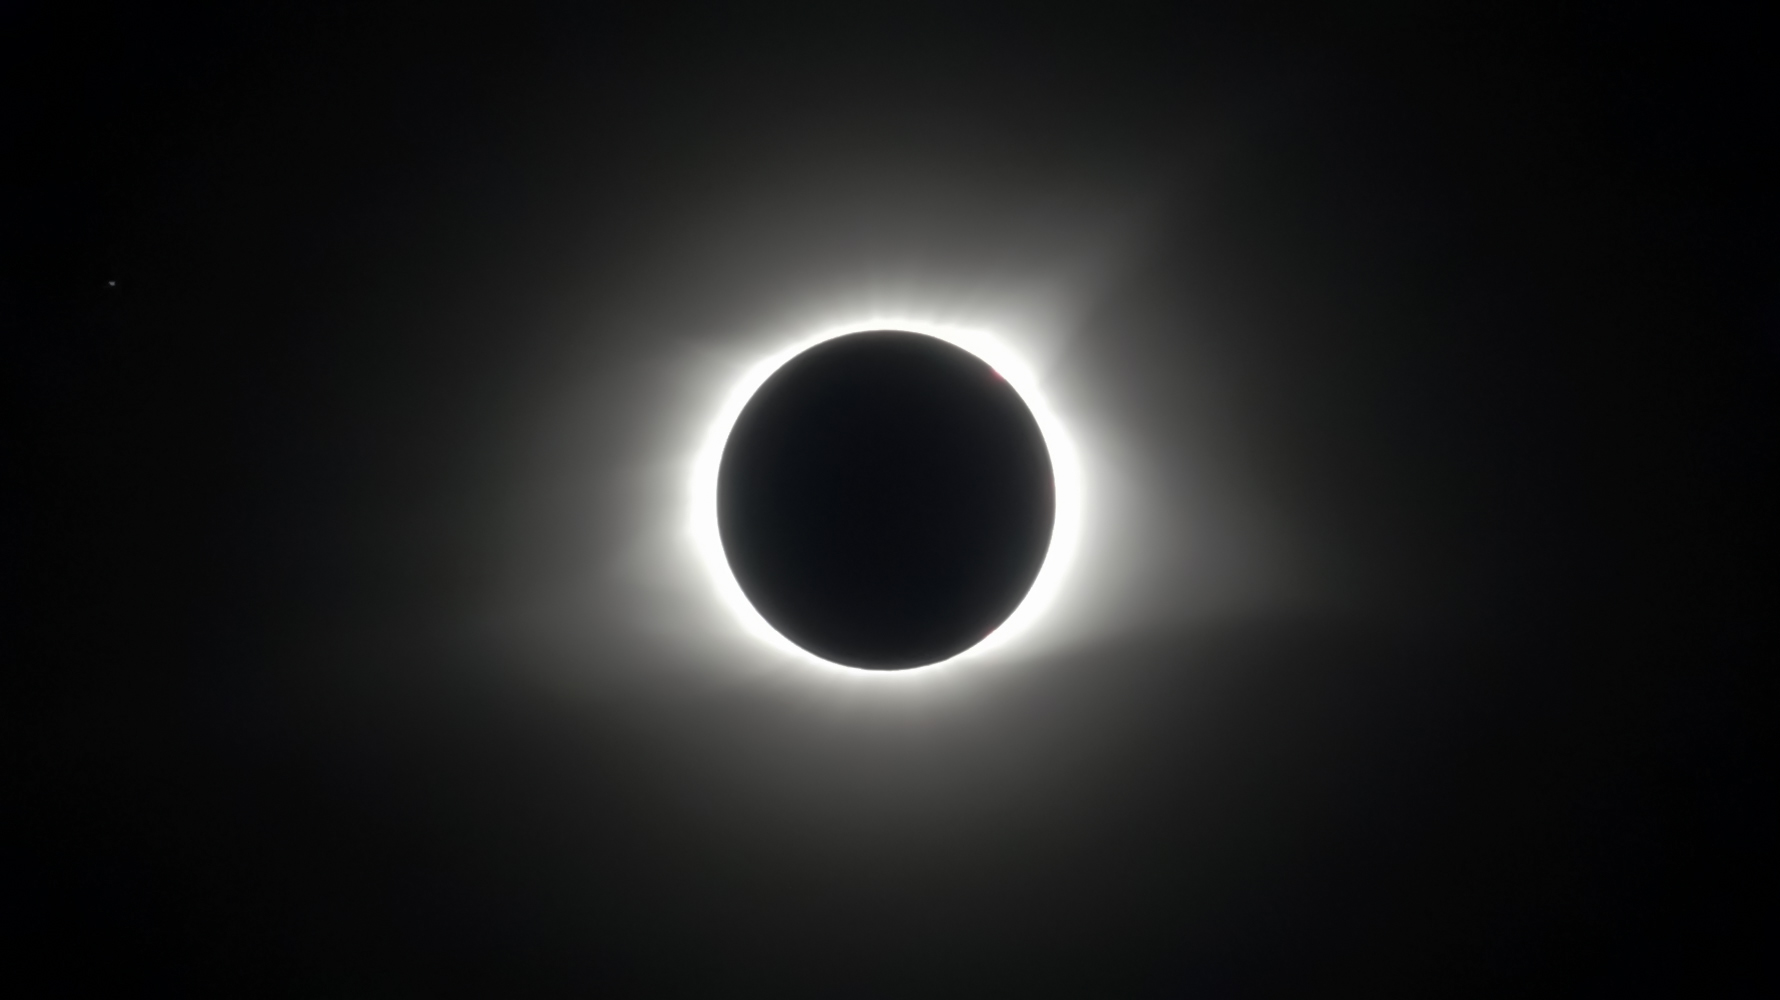 Solar eclipse with corona visible in dark sky.